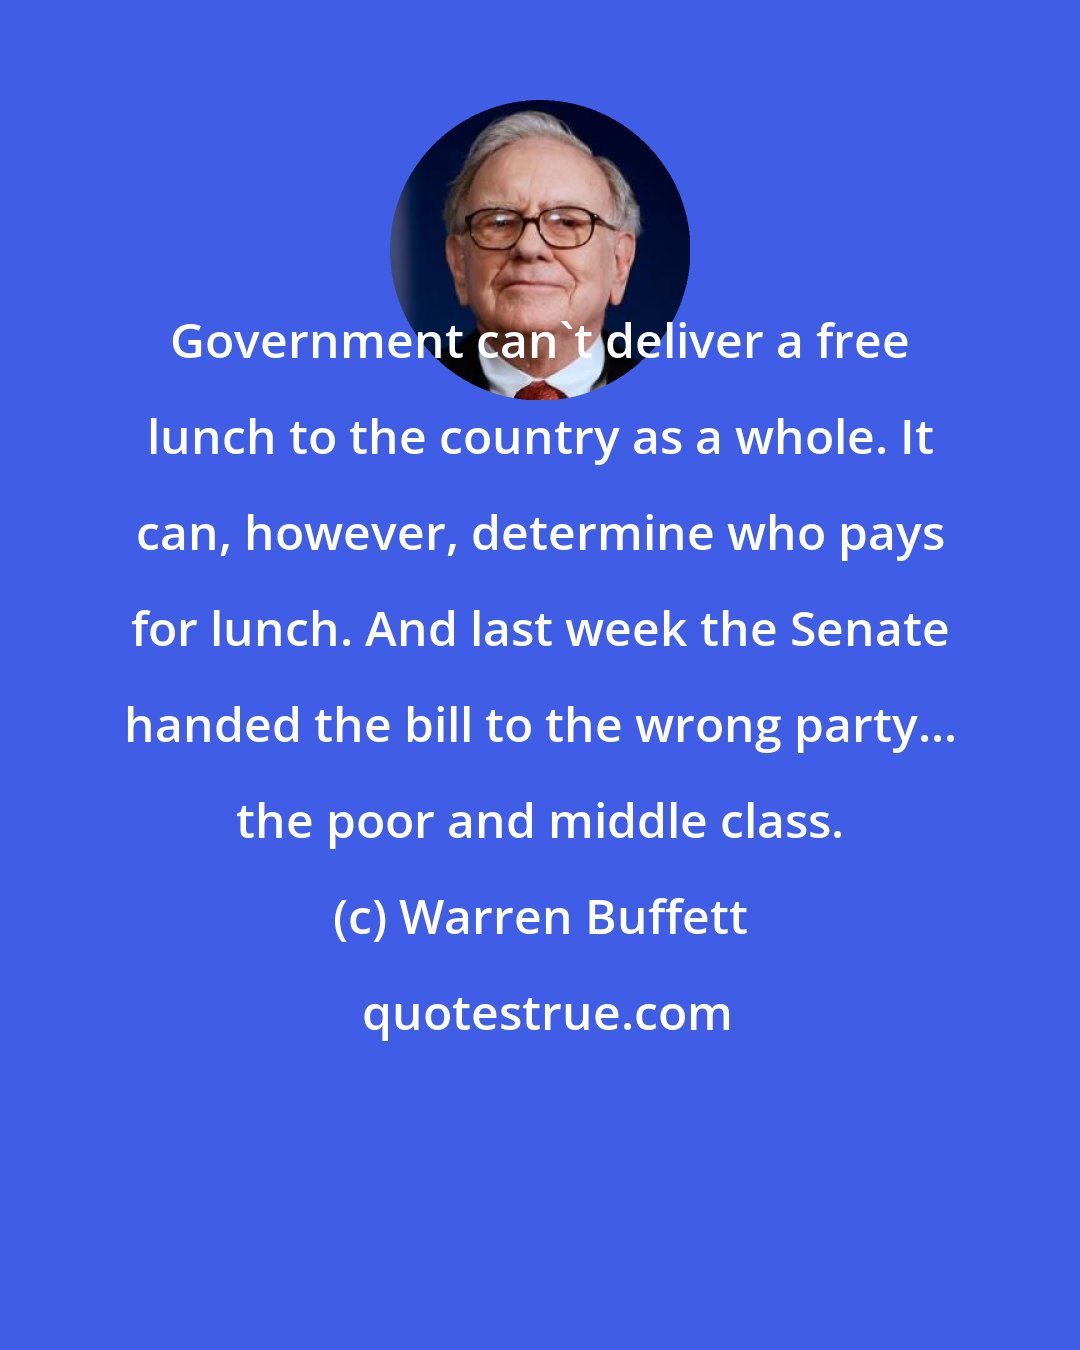 Warren Buffett: Government can't deliver a free lunch to the country as a whole. It can, however, determine who pays for lunch. And last week the Senate handed the bill to the wrong party... the poor and middle class.